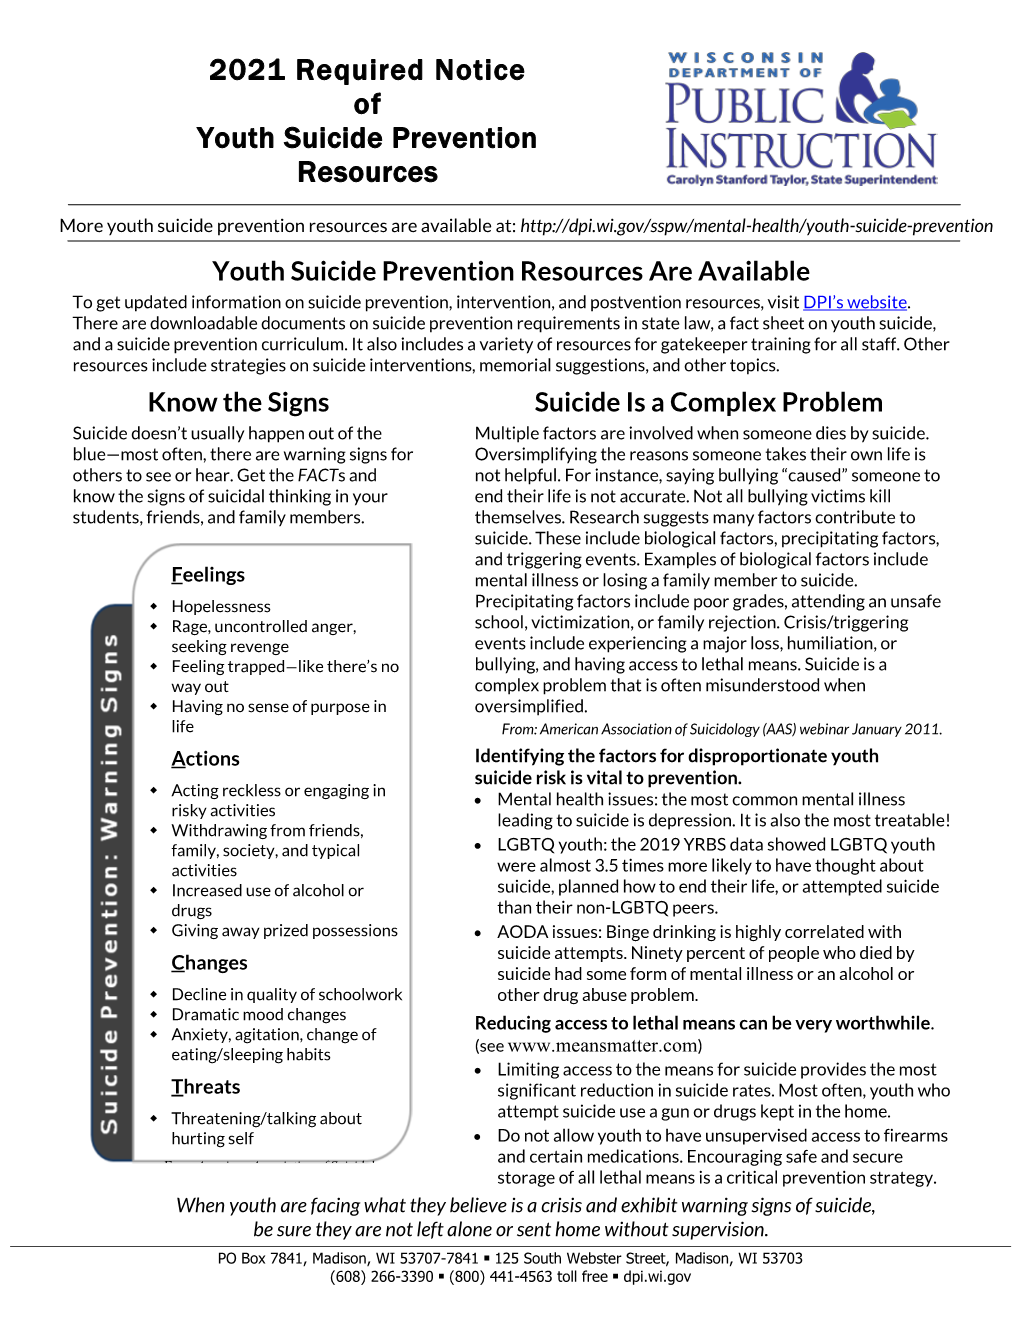 2021 Required Notice of Youth Suicide Prevention Resources